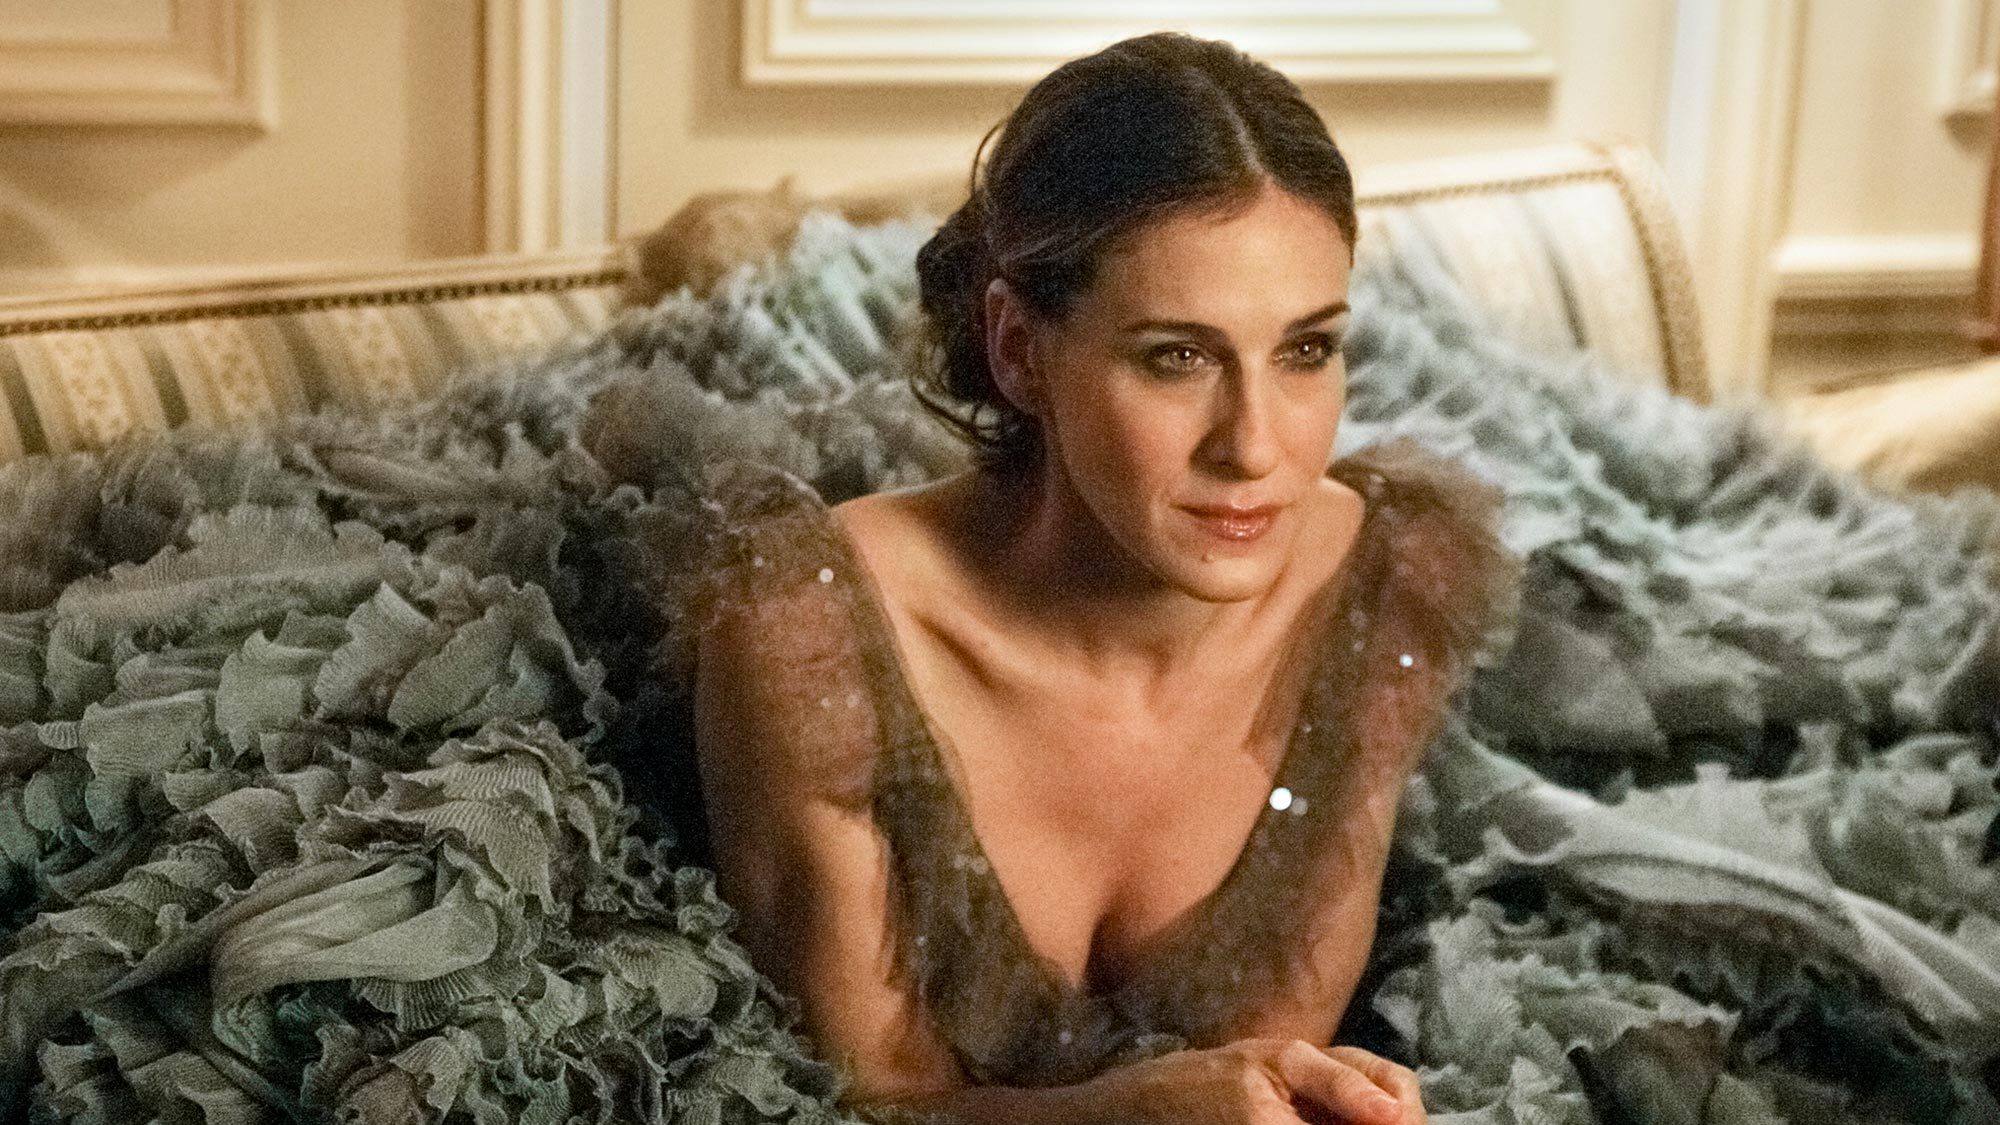 Sarah Jessica Parker as Carrie Bradshaw in Sex and the City